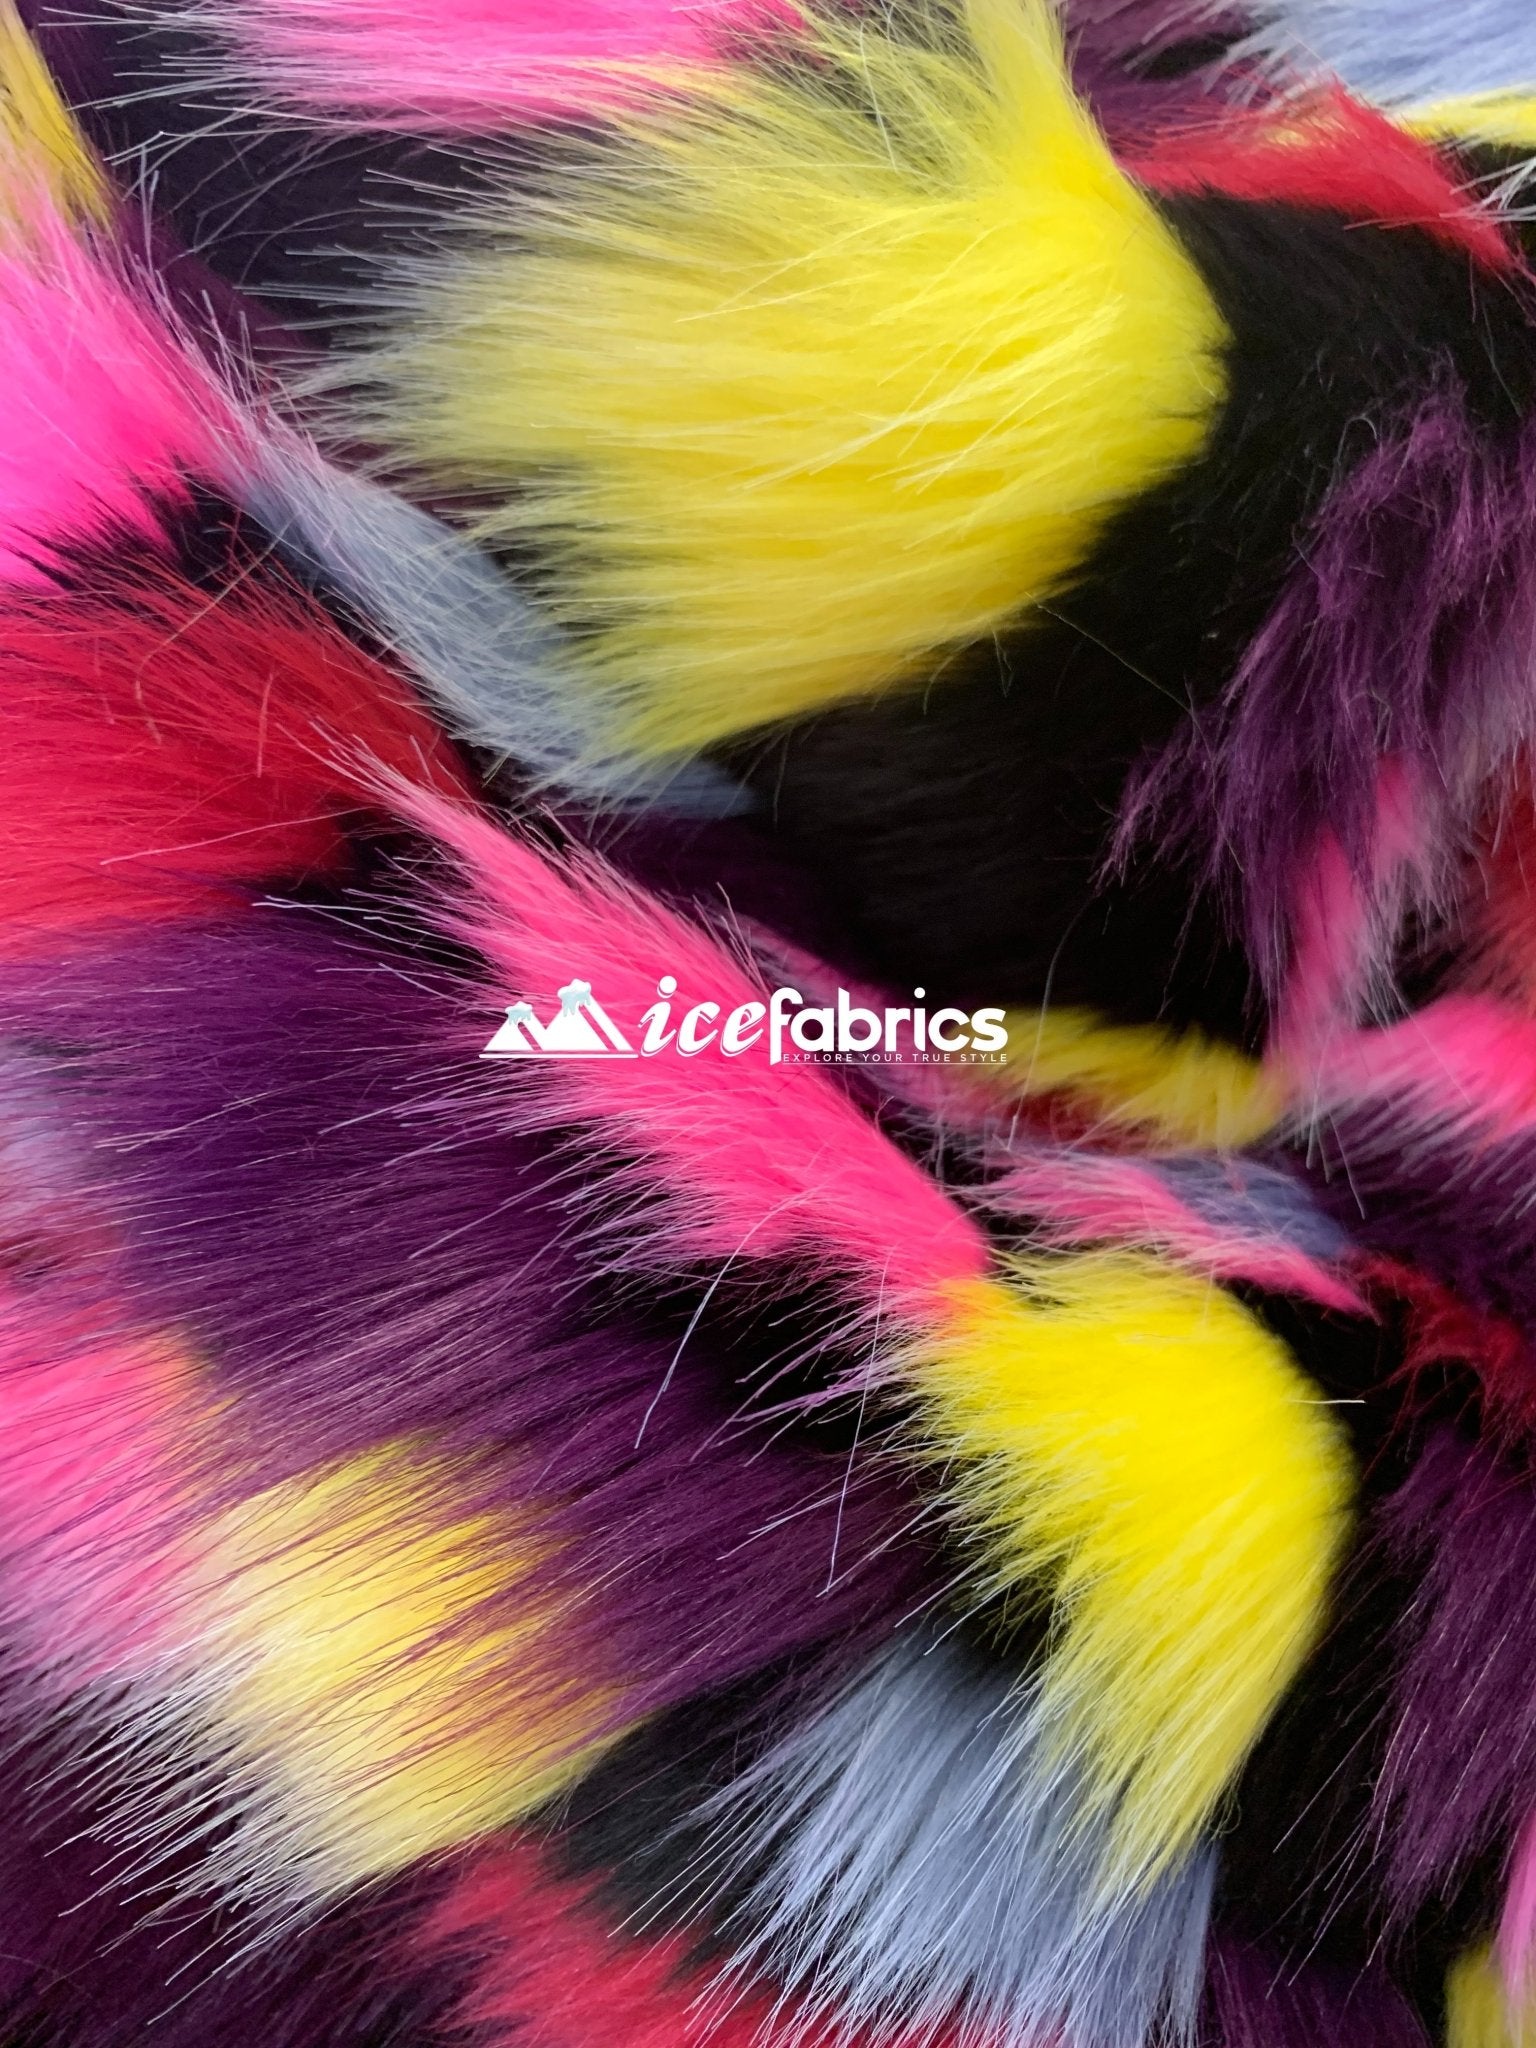 Multi-Color Animal Fake Faux Fur Fabric By The YardICEFABRICICE FABRICSGray Green BrownBy The Yard (60 inches Wide)Multi-Color Animal Fake Faux Fur Fabric By The Yard ICEFABRIC Yellow Pink Burgundy